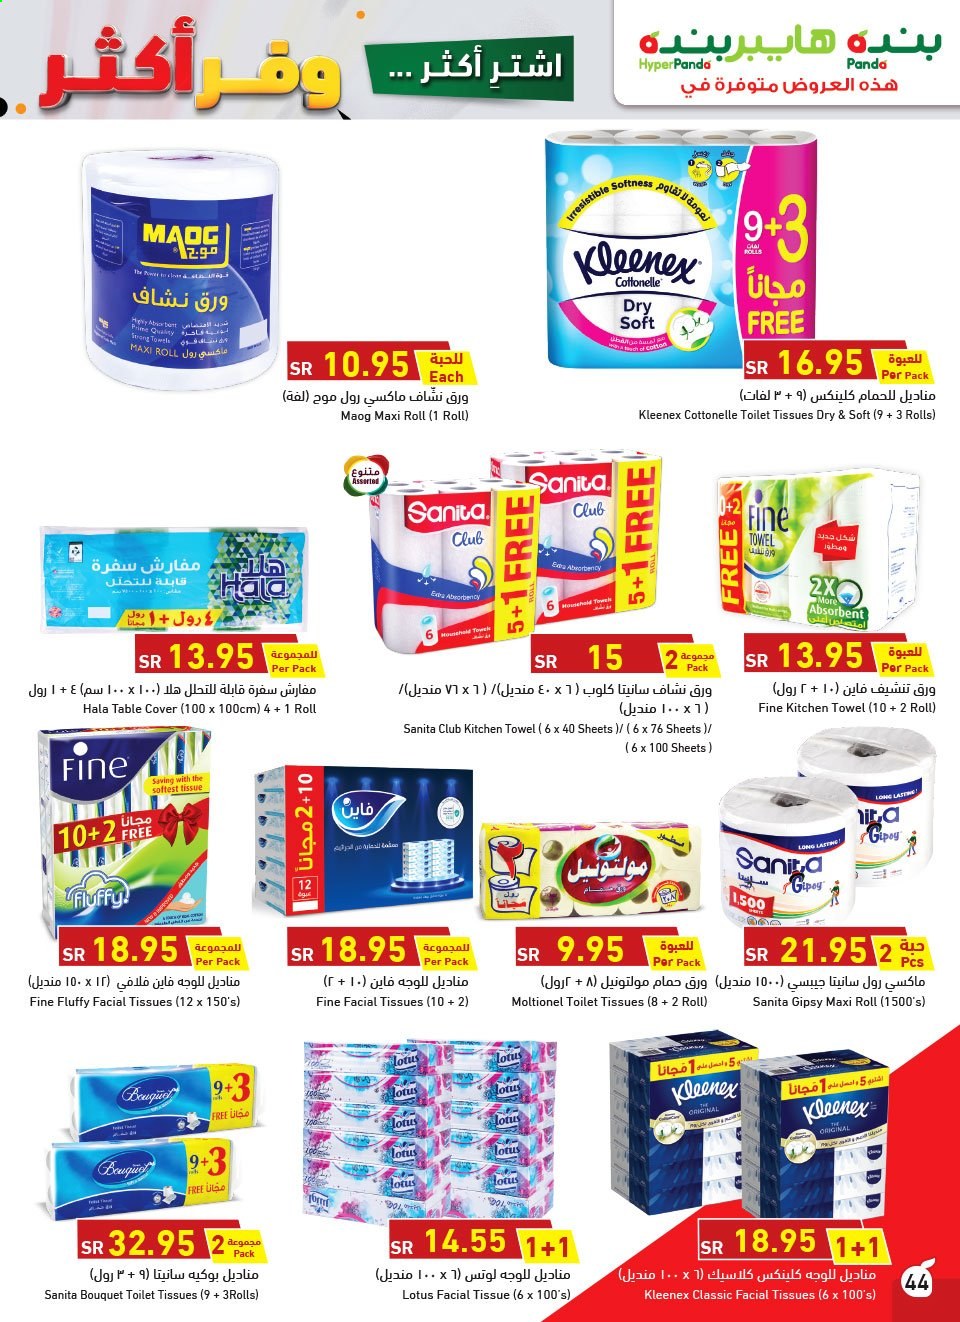 <retailer> - <MM.DD.YYYY - MM.DD.YYYY> - Sales products - ,<products from offers>. Page 44.